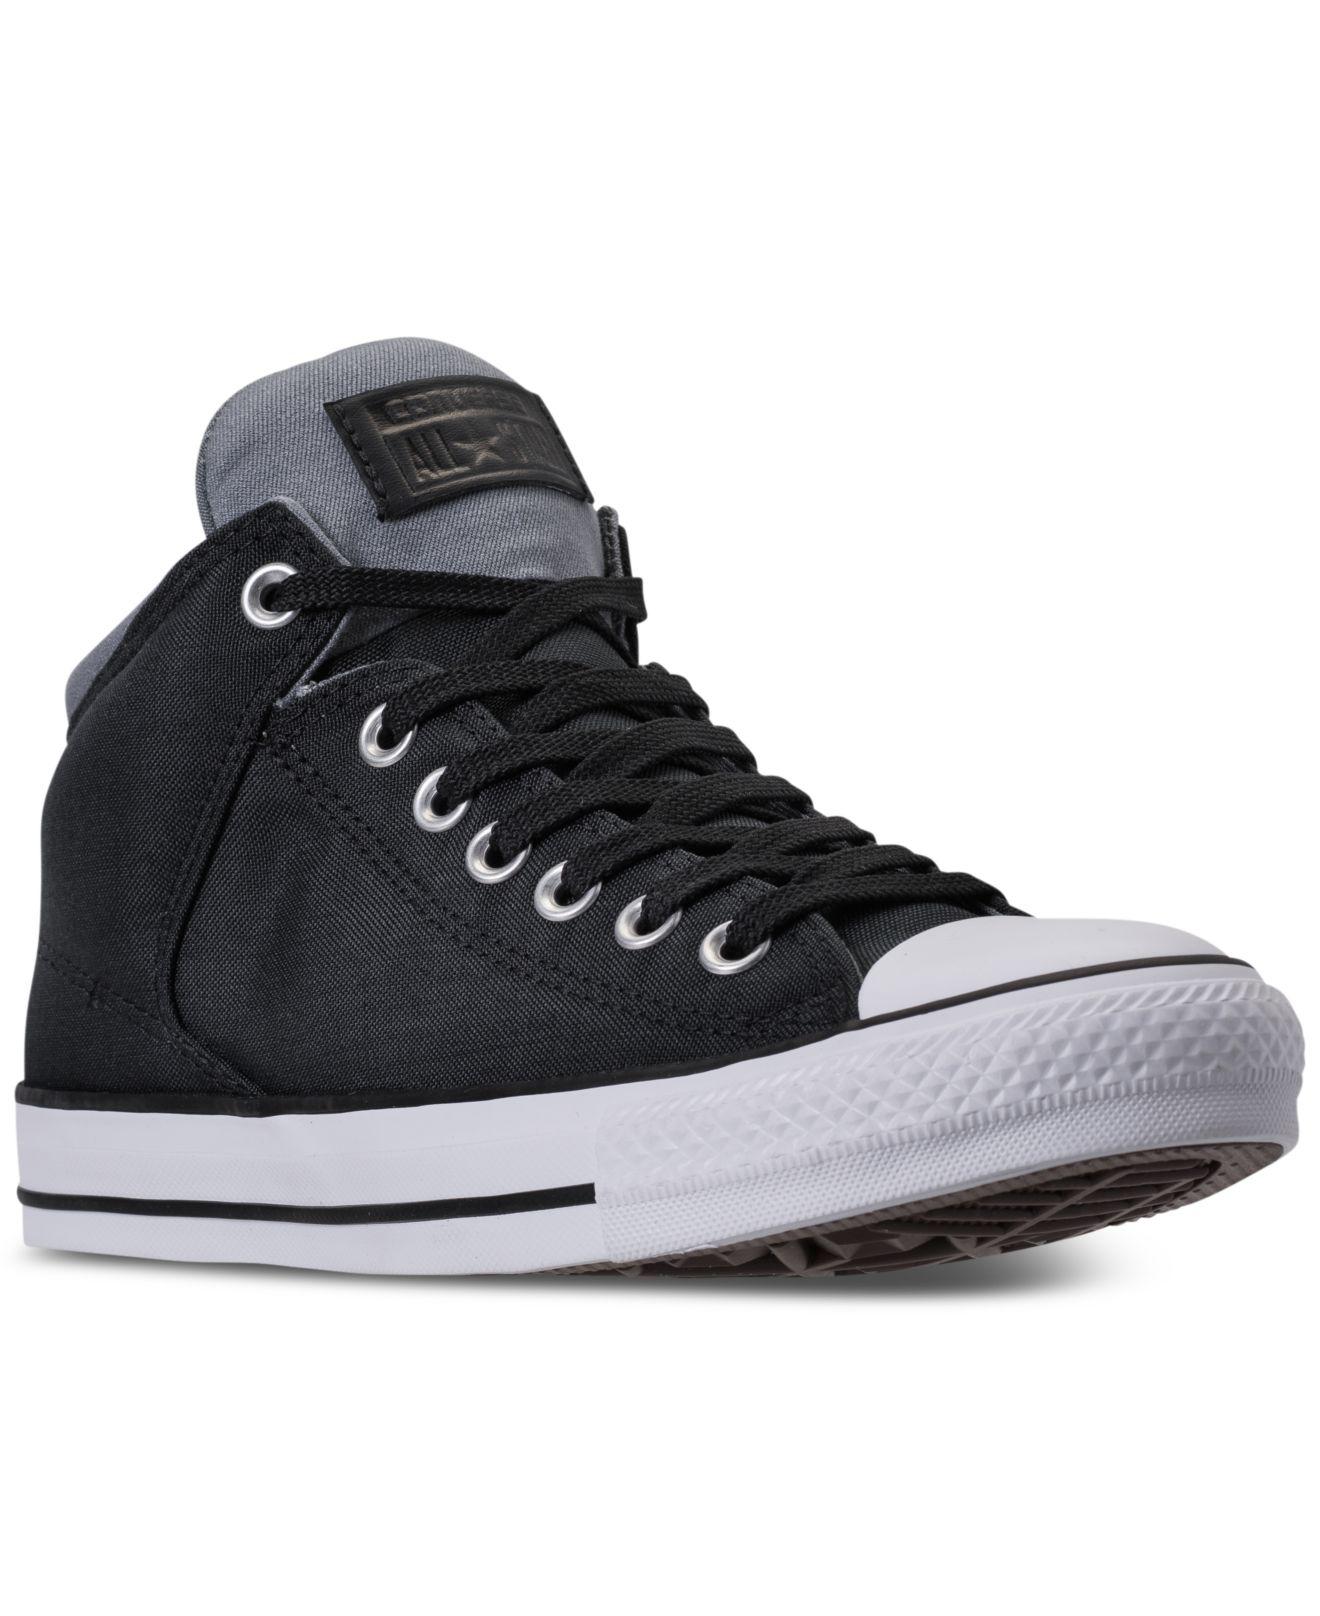 Converse Men's Chuck Taylor All Star High Street Casual Sneakers From ...